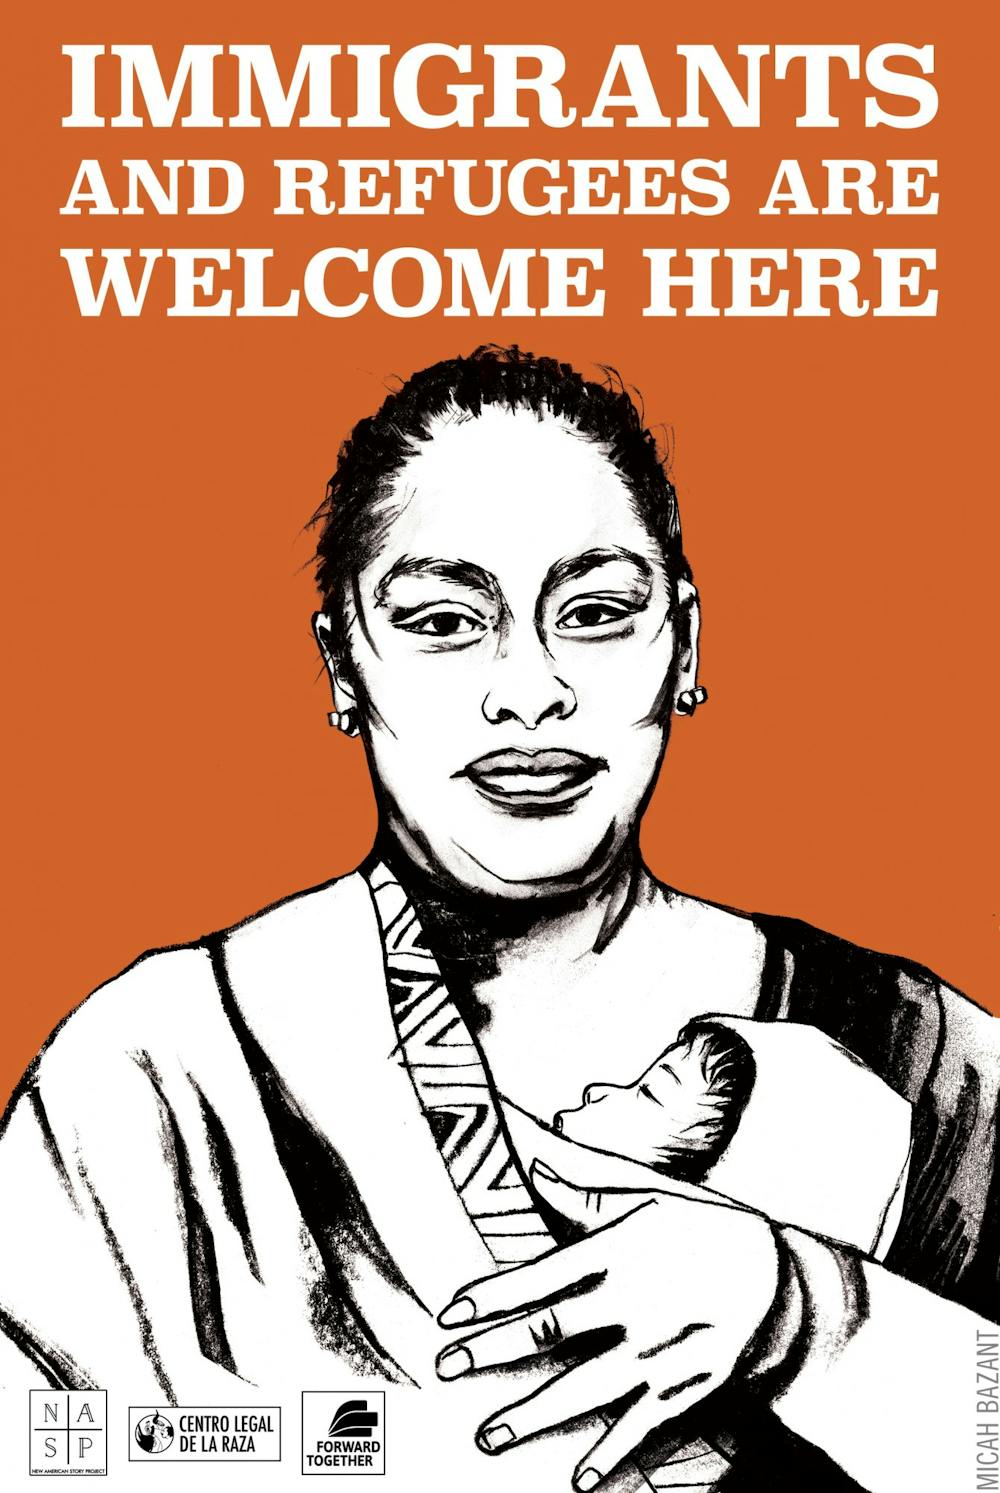 A poster produced by the New American Story Project by artist Micah Bazant. Bazant worked from a photograph of a Mayan women who received asylum.